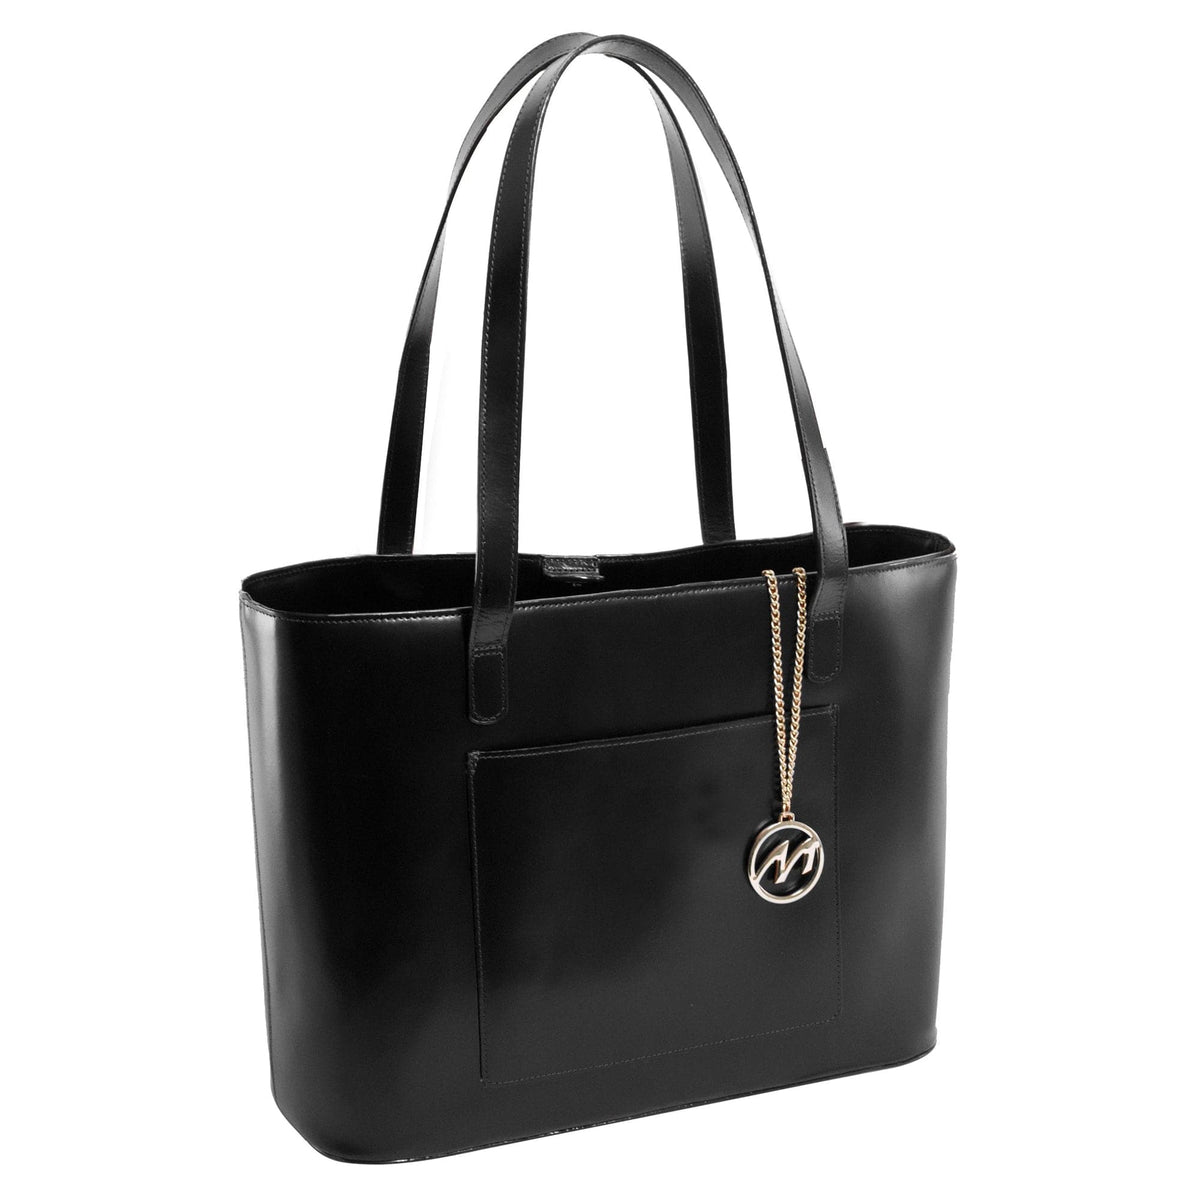 McKlein USA Alyson Leather Tote Bag with Tablet Pocket